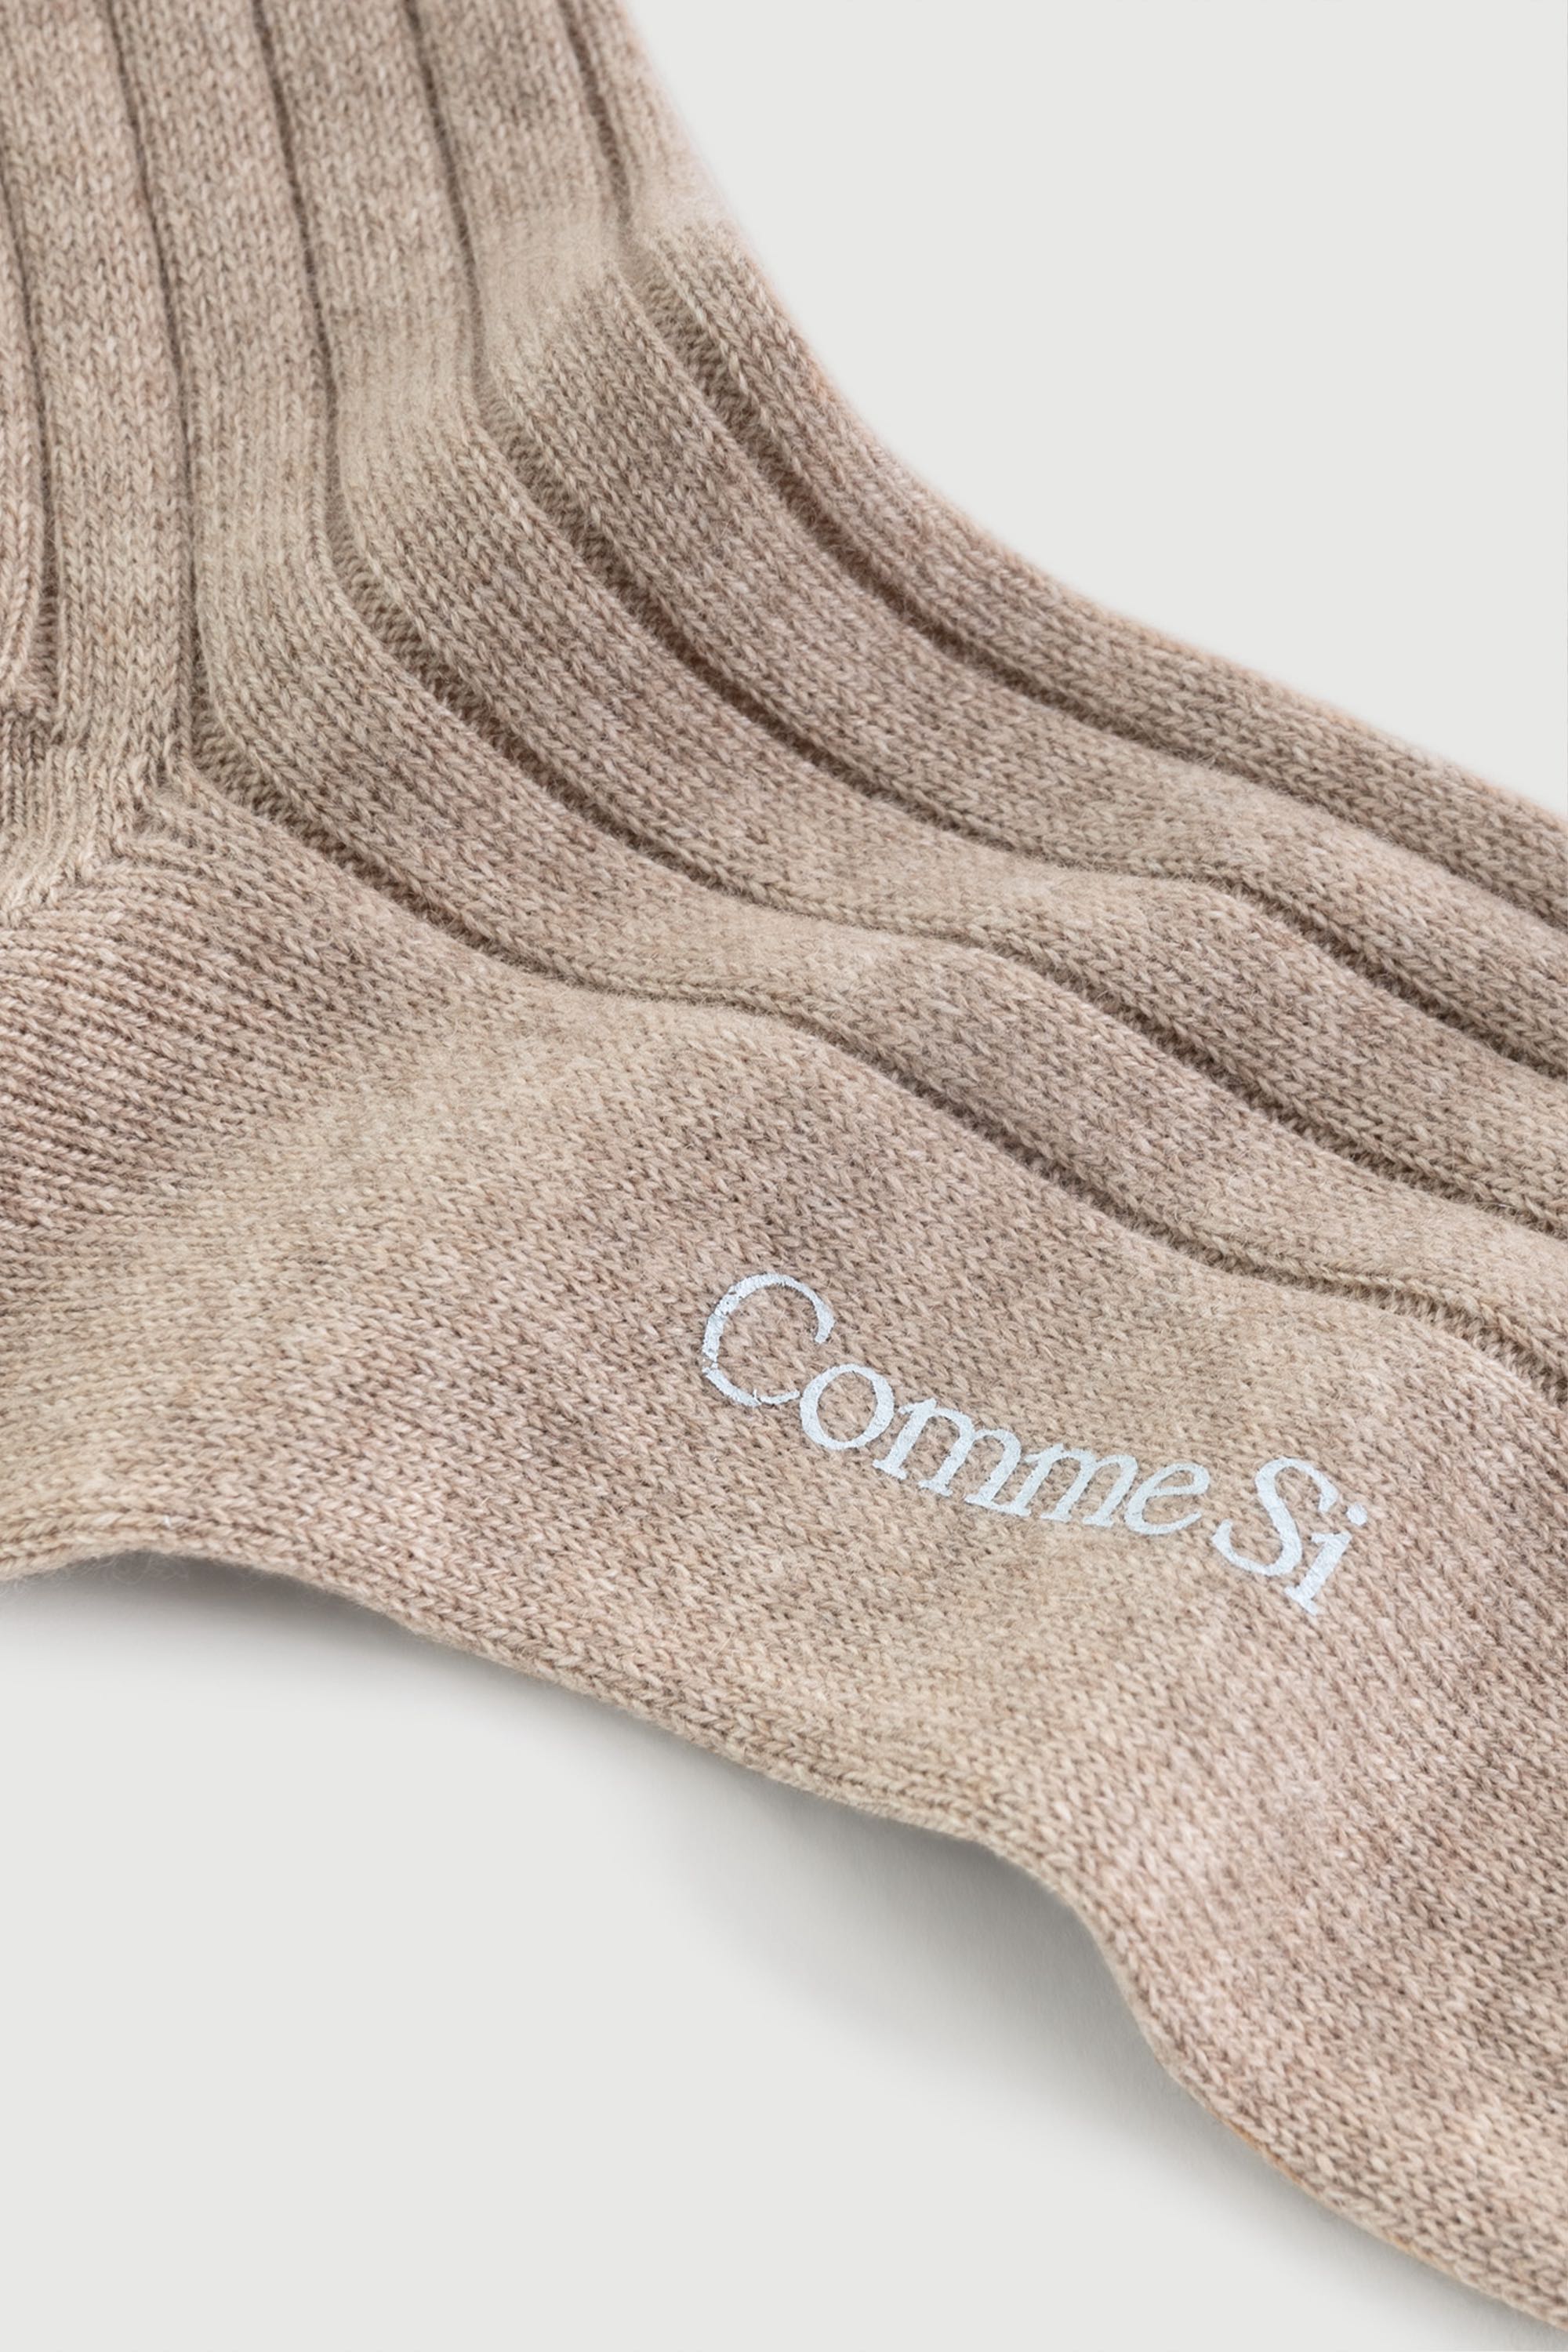 Footbed detail, The Danielle Sock, Mongolian Cashmere, Oatmeal, Comme Si